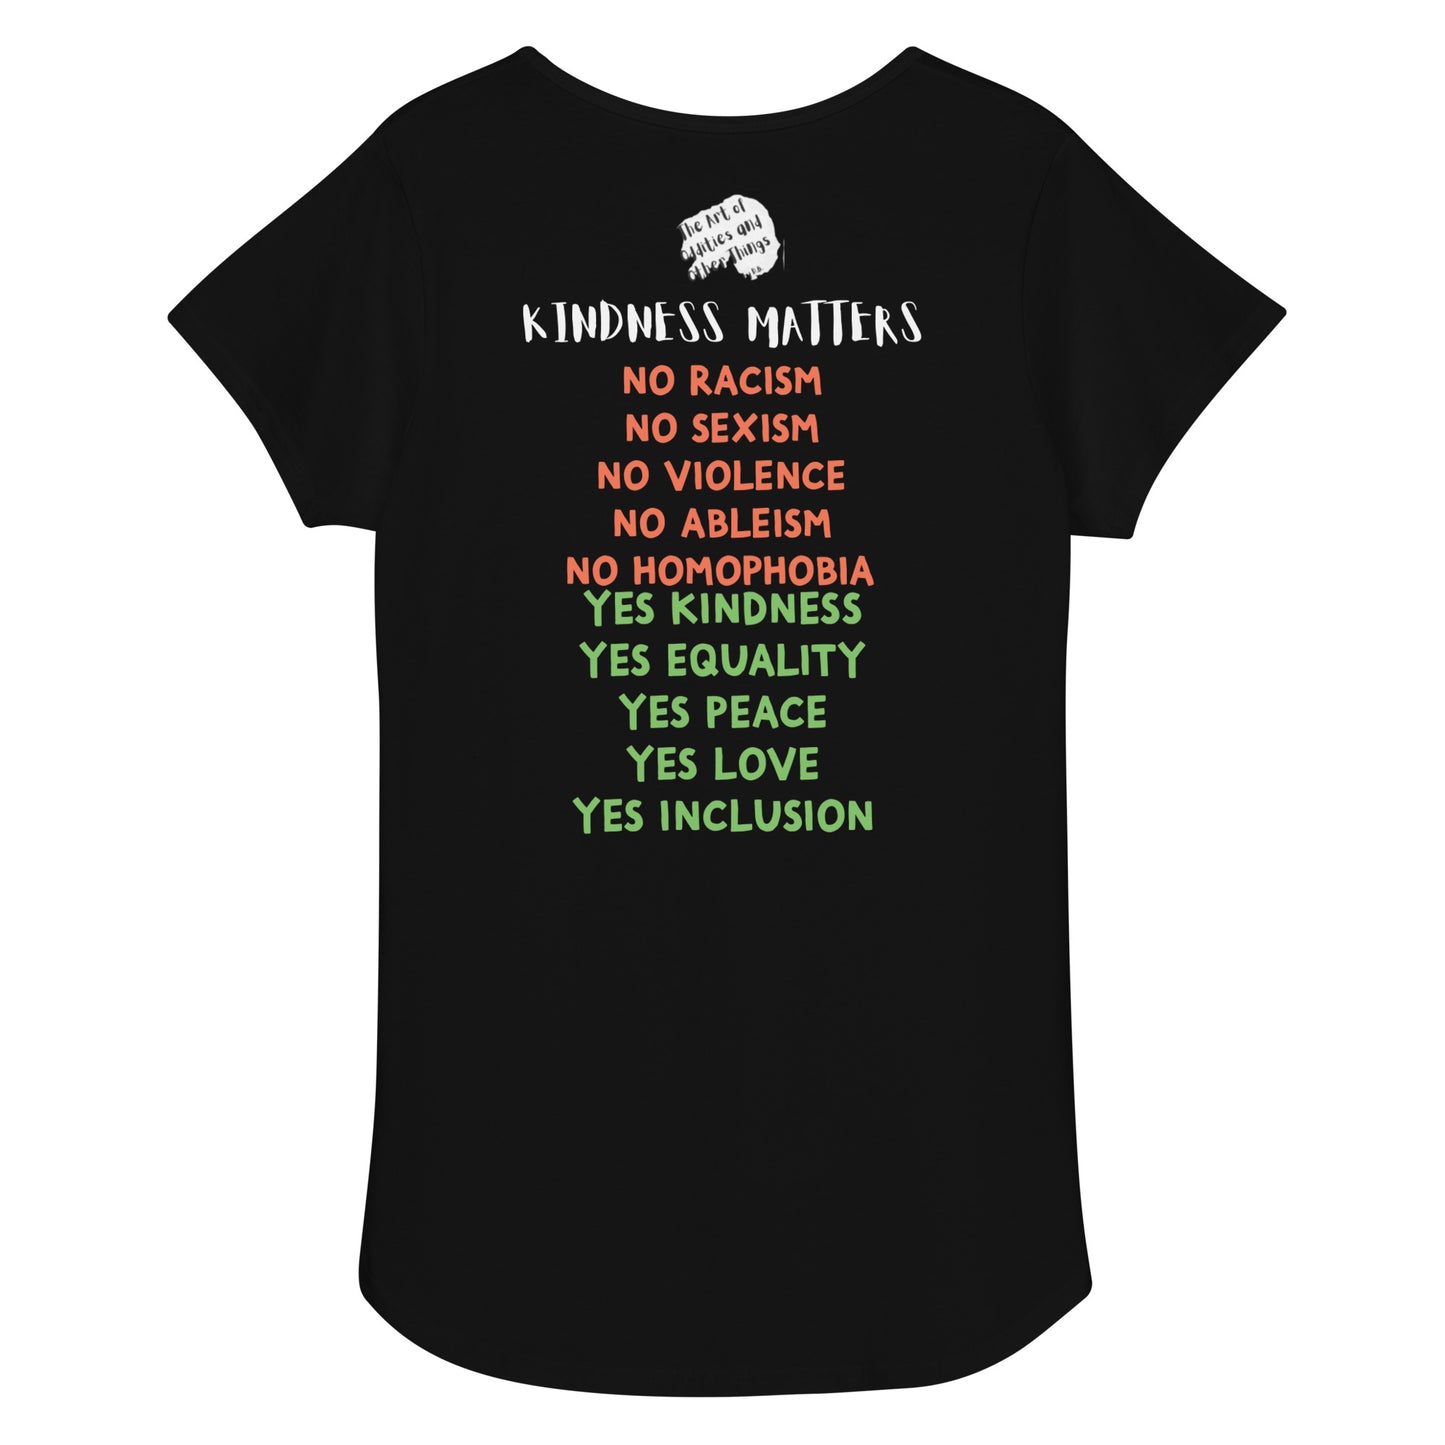 Kindness Matters, Nima and Dawa Tee printed both sides, by DB Art printed on Women’s round neck tee